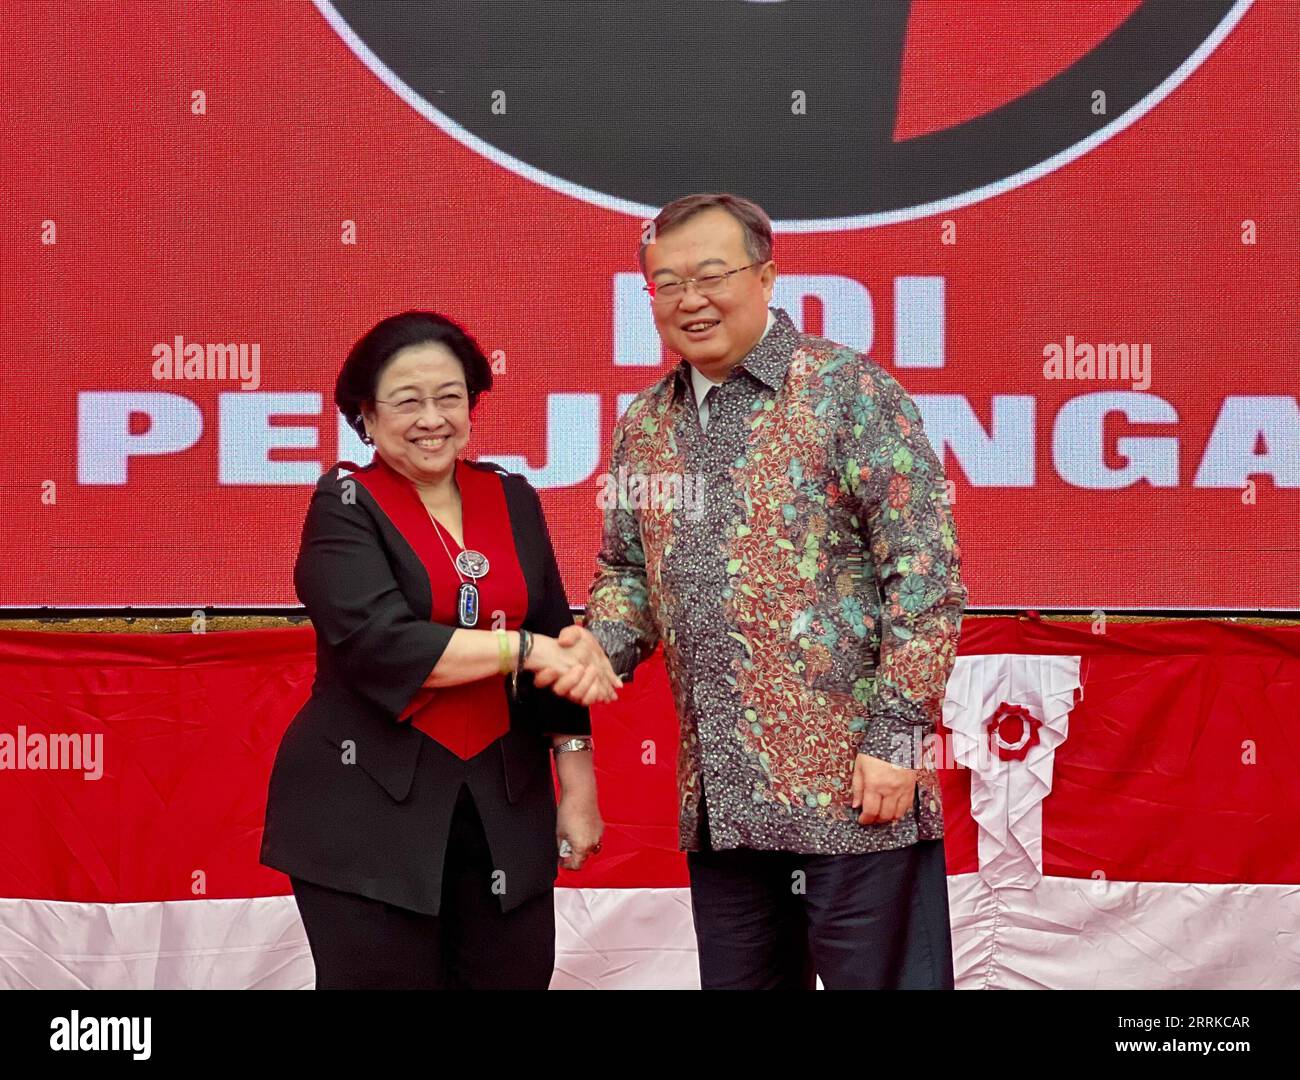 220901 -- JAKARTA, Sept. 1, 2022 -- Liu Jianchao R, head of the International Department of the Communist Party of China Central Committee, meets with former president and chairwoman of the Indonesian Democratic Party of Struggle Megawati Soekarnoputri in Jakarta, Indonesia, Aug. 30, 2022. INDONESIA-CHINA-LIU JIANCHAO-VISIT XuxQin PUBLICATIONxNOTxINxCHN Stock Photo